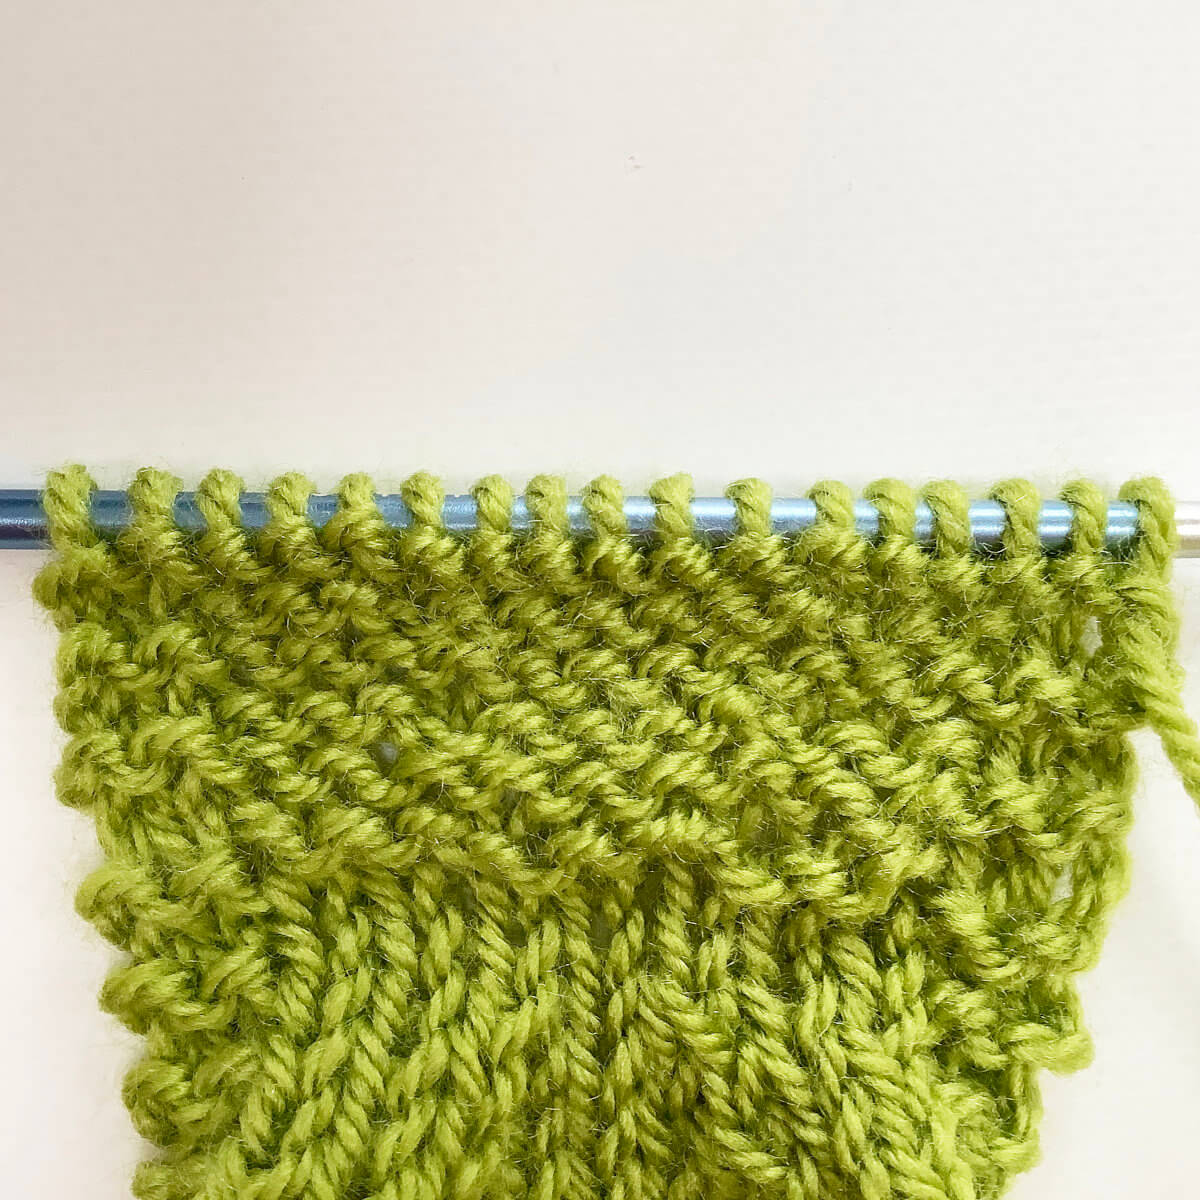 Working a pfb - the result on the purl side